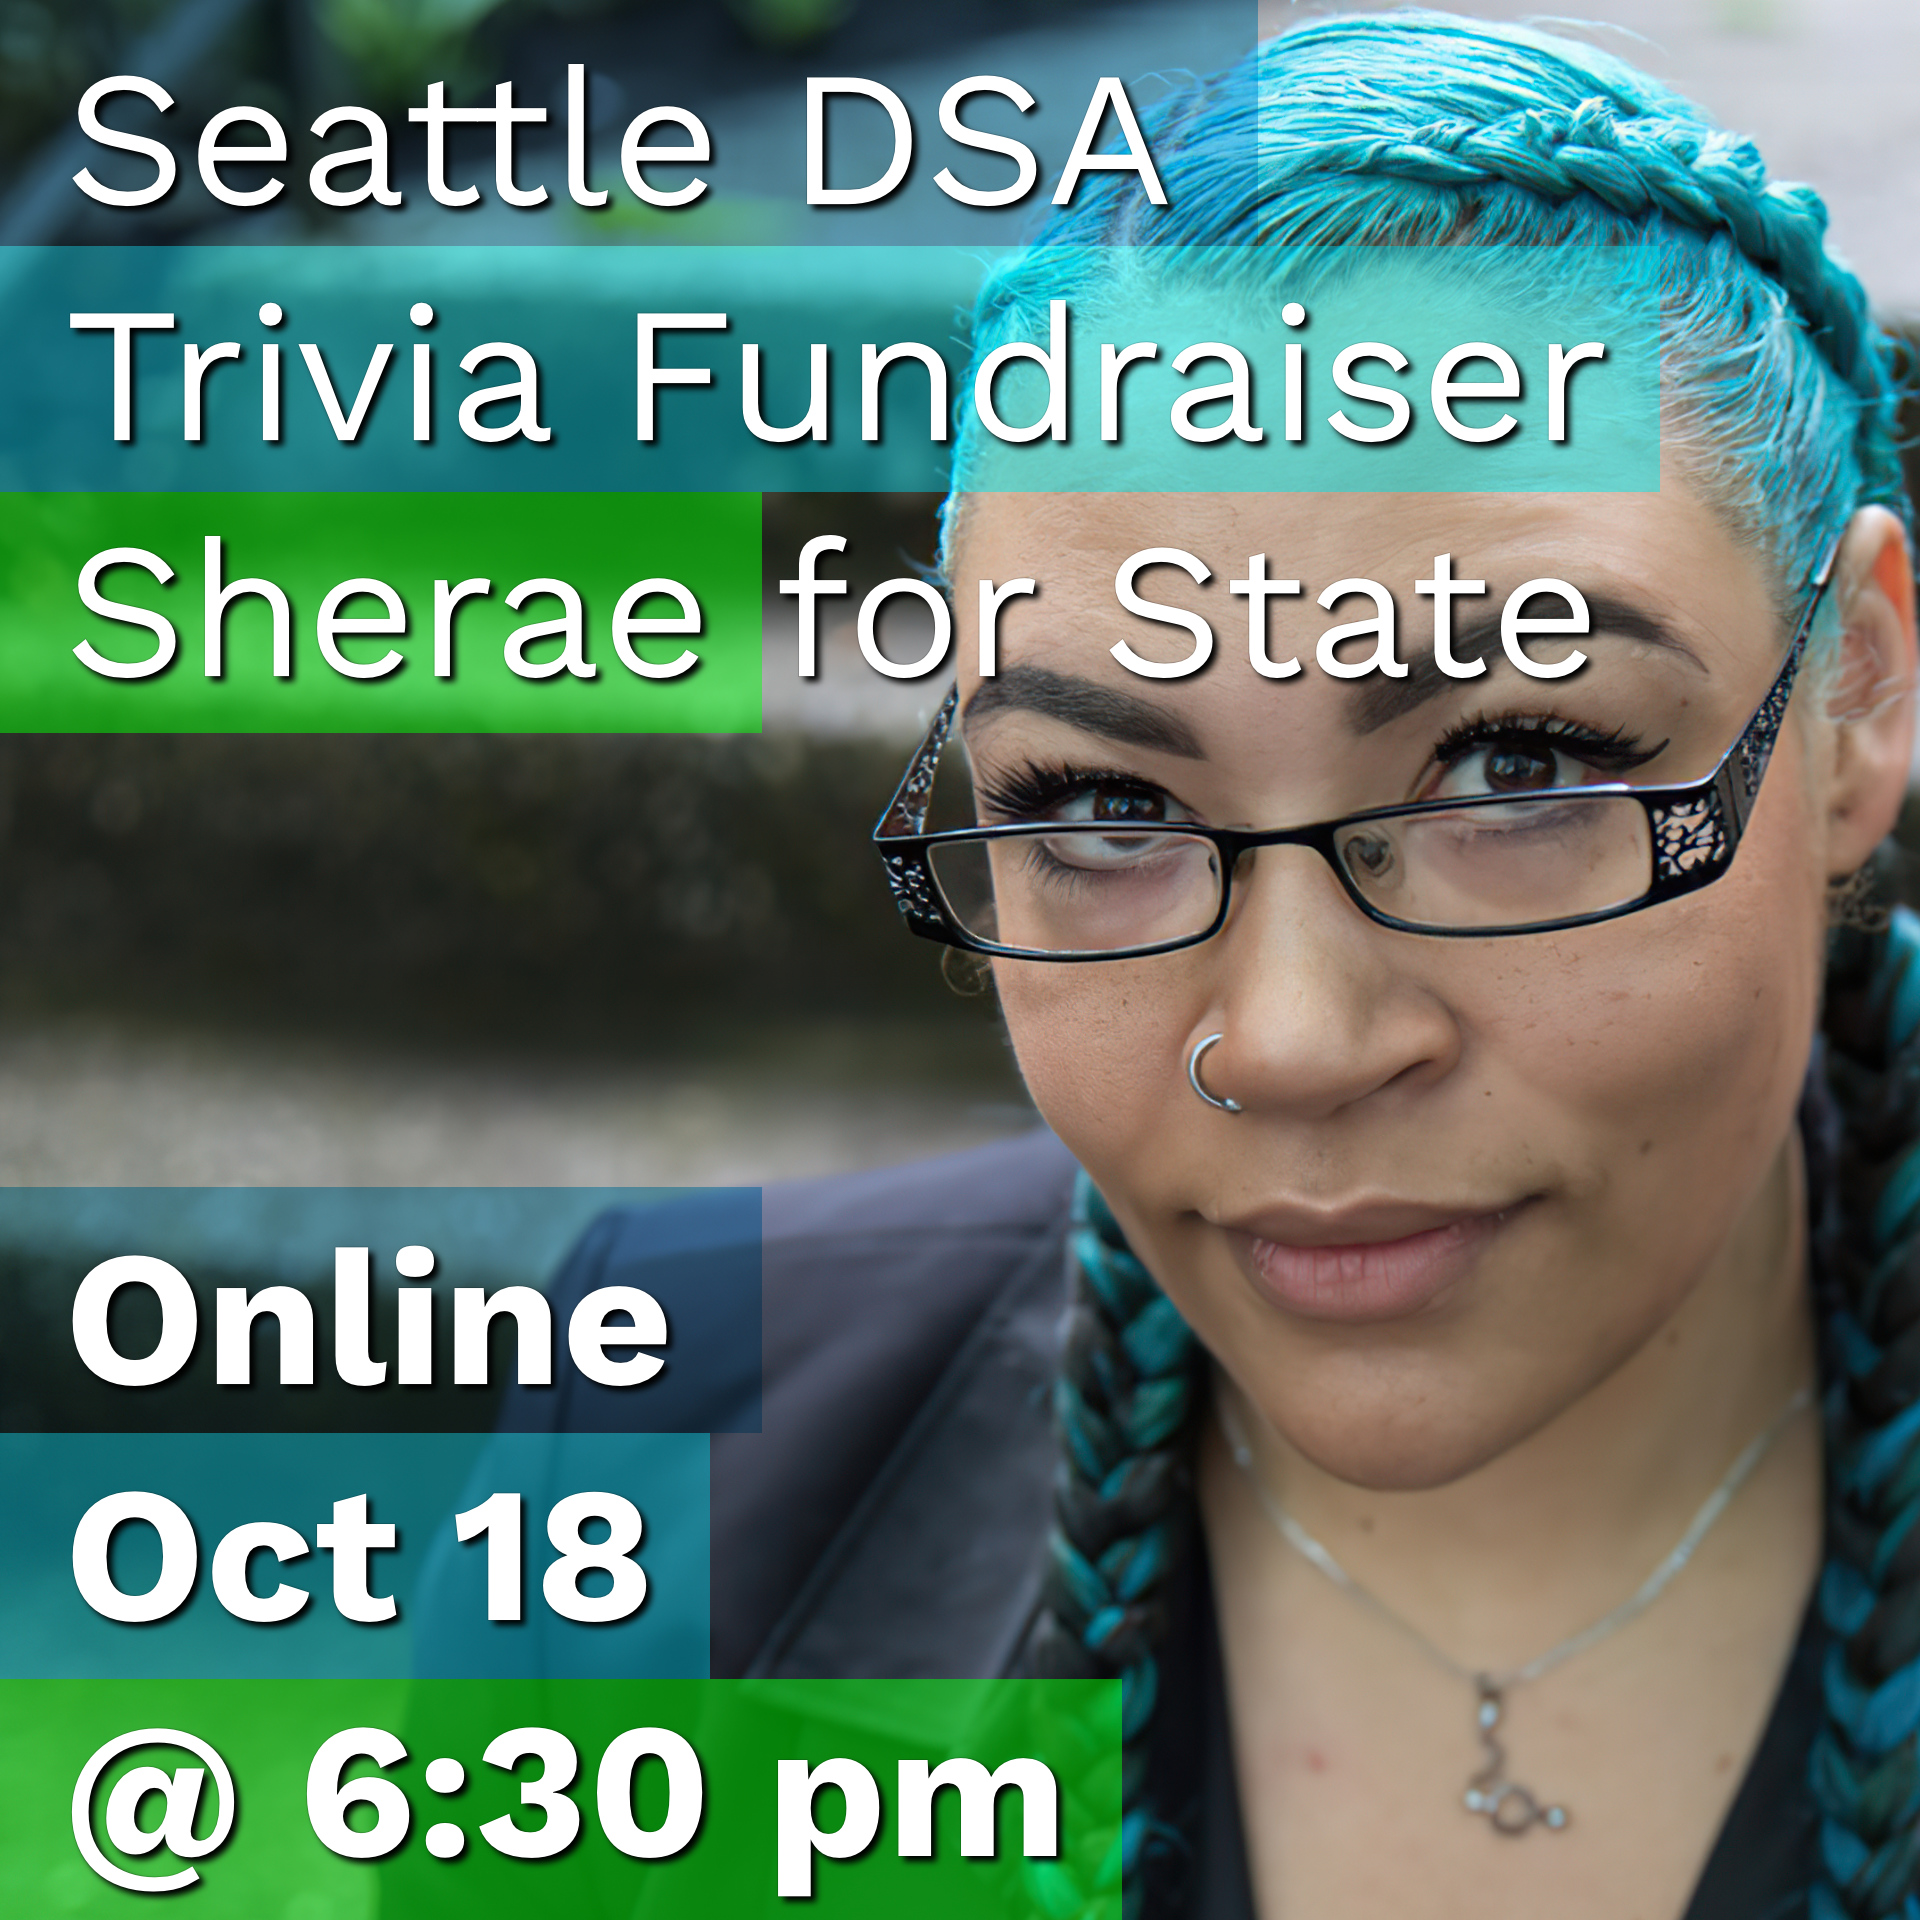 Close-up photo of Sherae Lascelles, color gradient map with green highlights and deep blue shadows, who is running against Frank Chop. White text is overtop with the words Seattle DSA Endorsements 2020